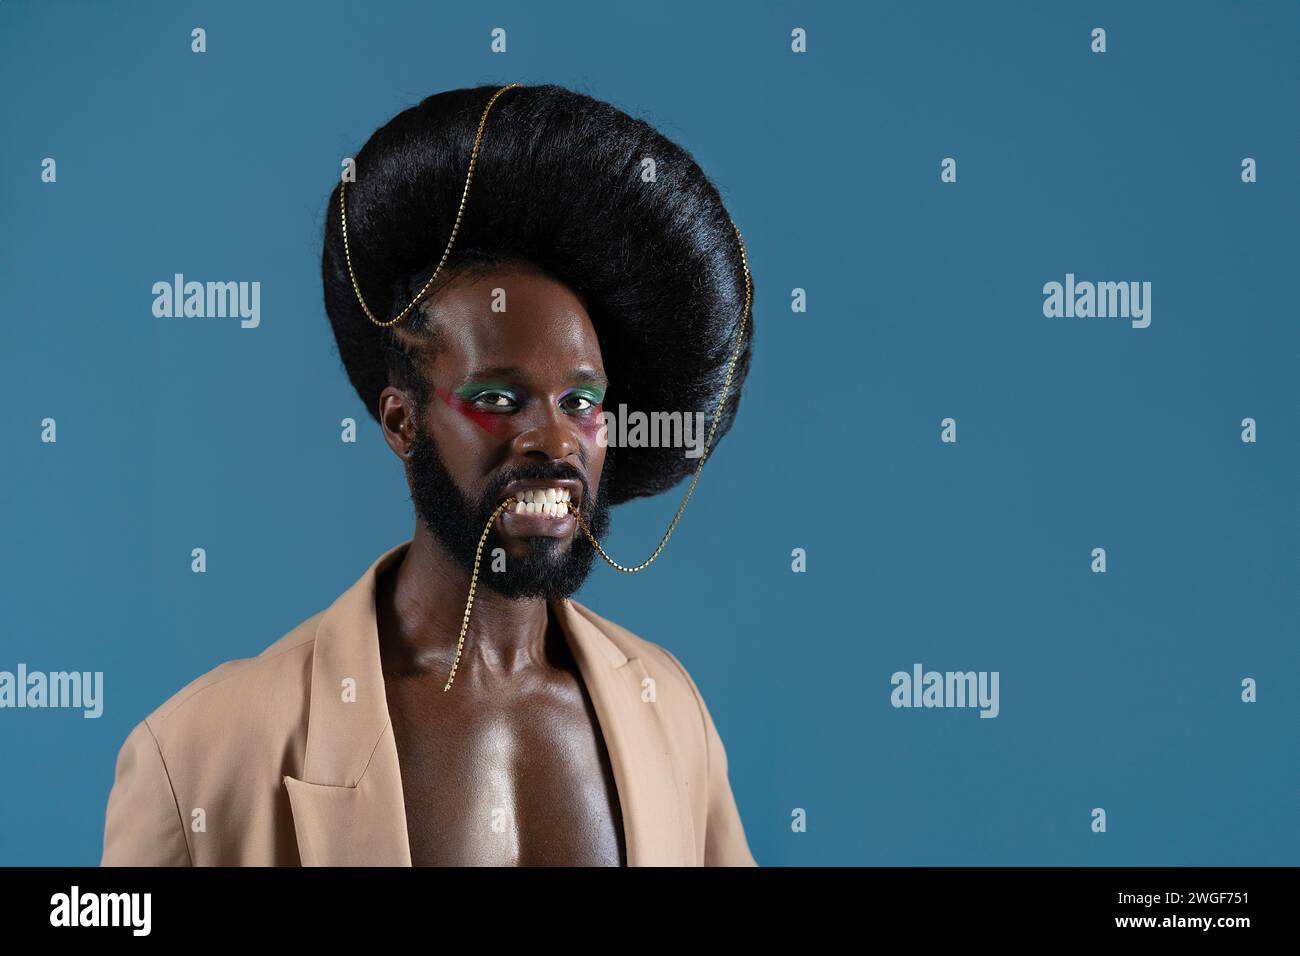 Portrait of African American gay man with makeup and black vintage wig. LGBT person holding gold accessory with teeth and wearing jacket on blue background. Stock Photo